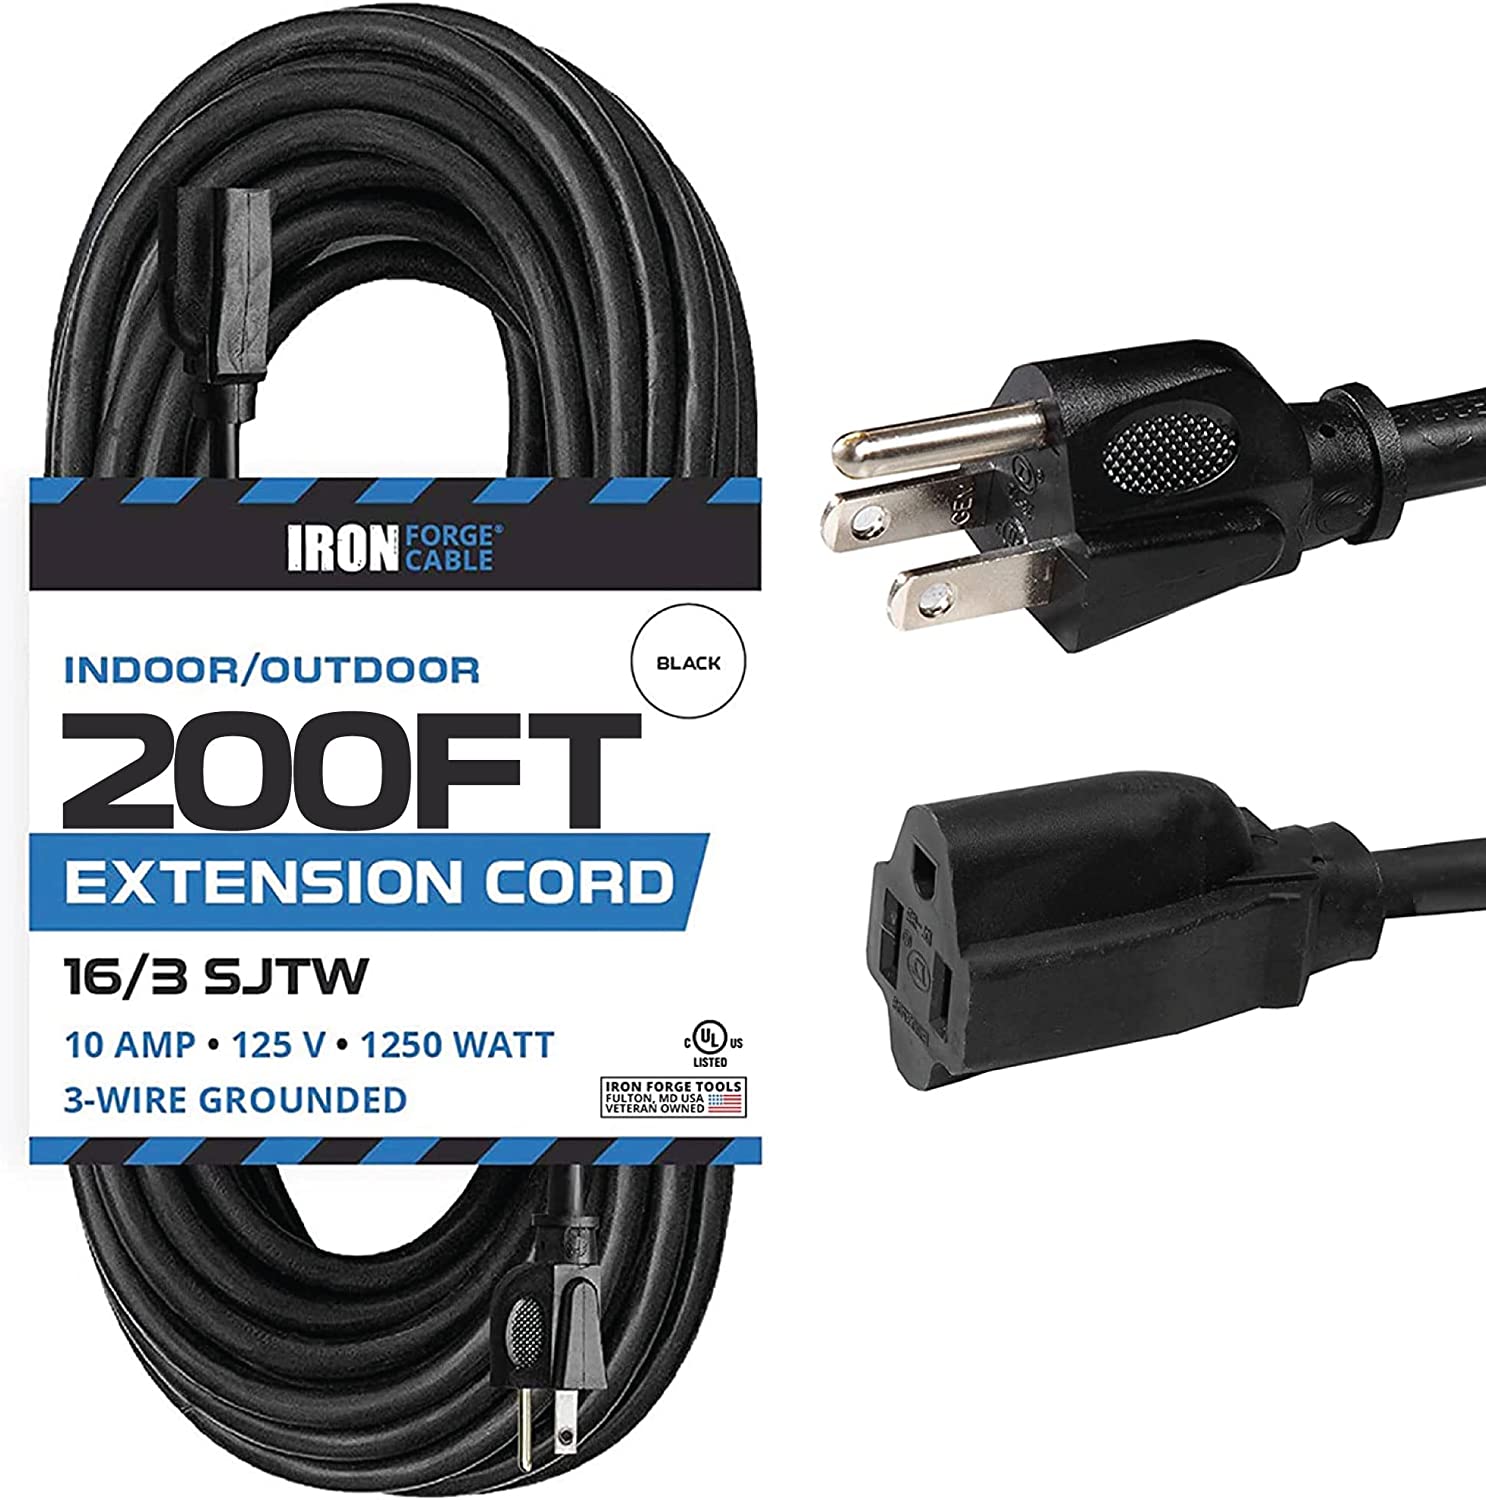 200 Ft Outdoor Extension Cord - 16/3 Durable Black Cable with 3 Prong Grounded Plug for Safety